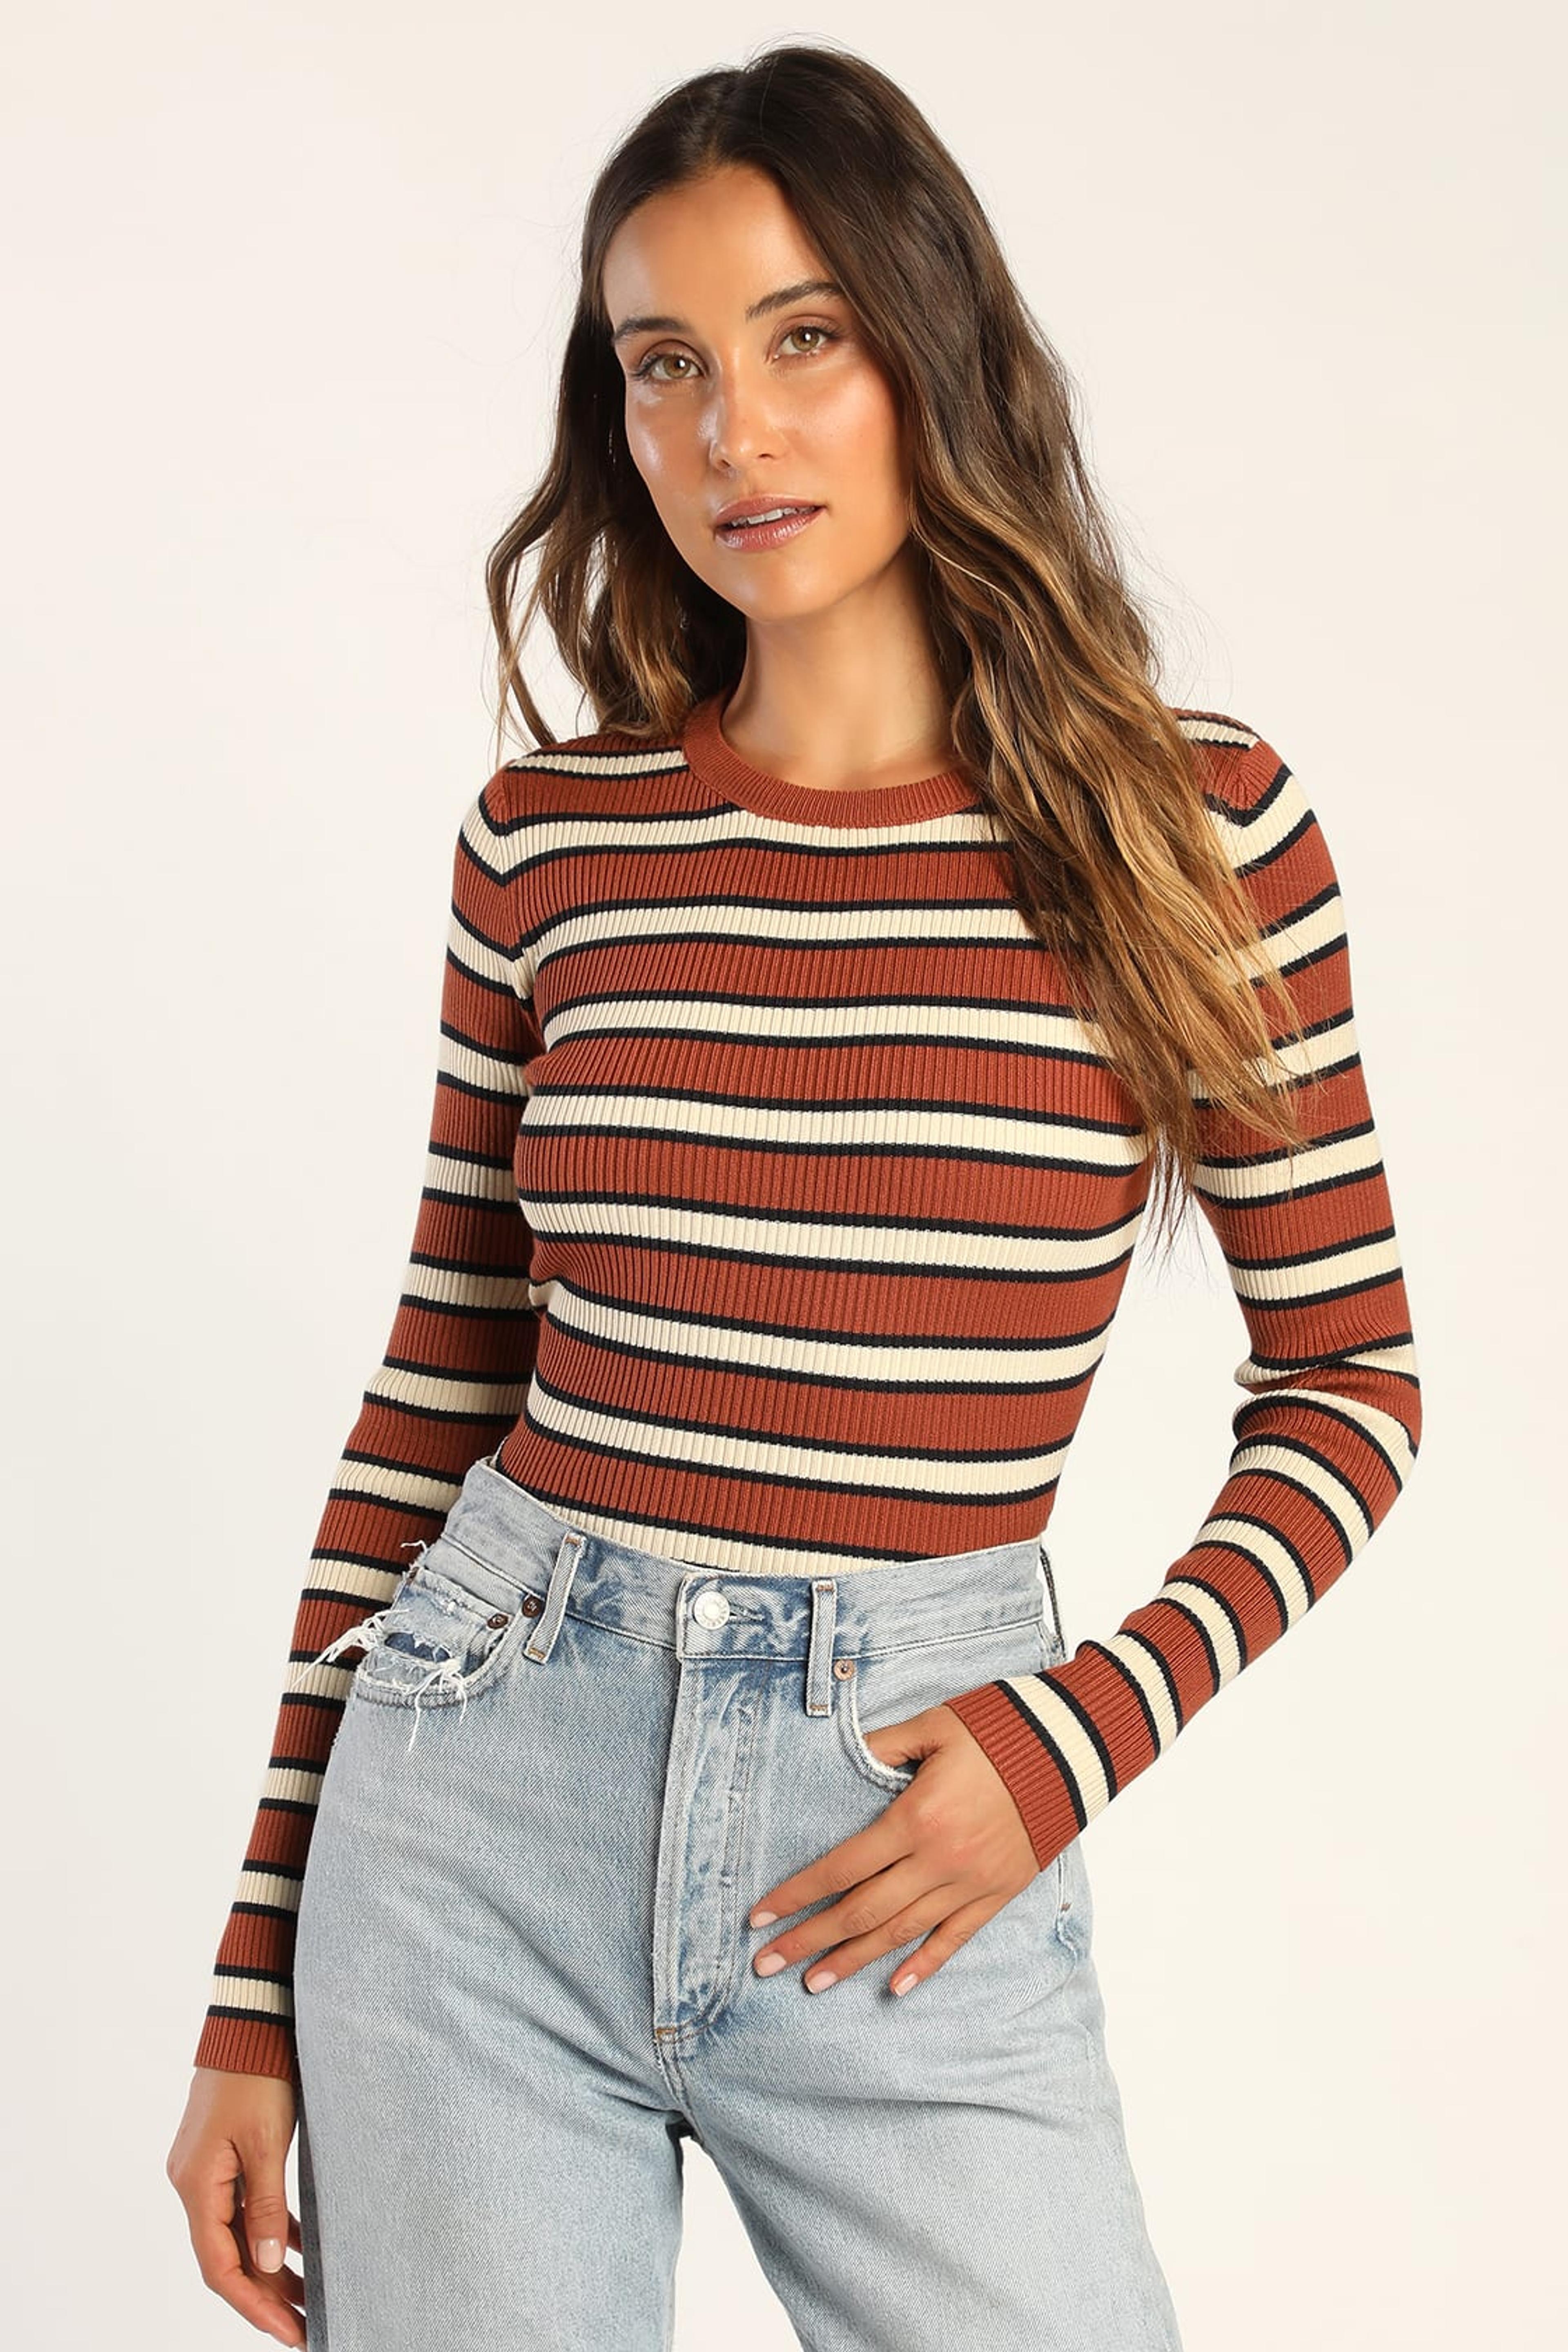 Rust Brown Sweater - Striped Sweater - Ribbed Knit Sweater - Lulus